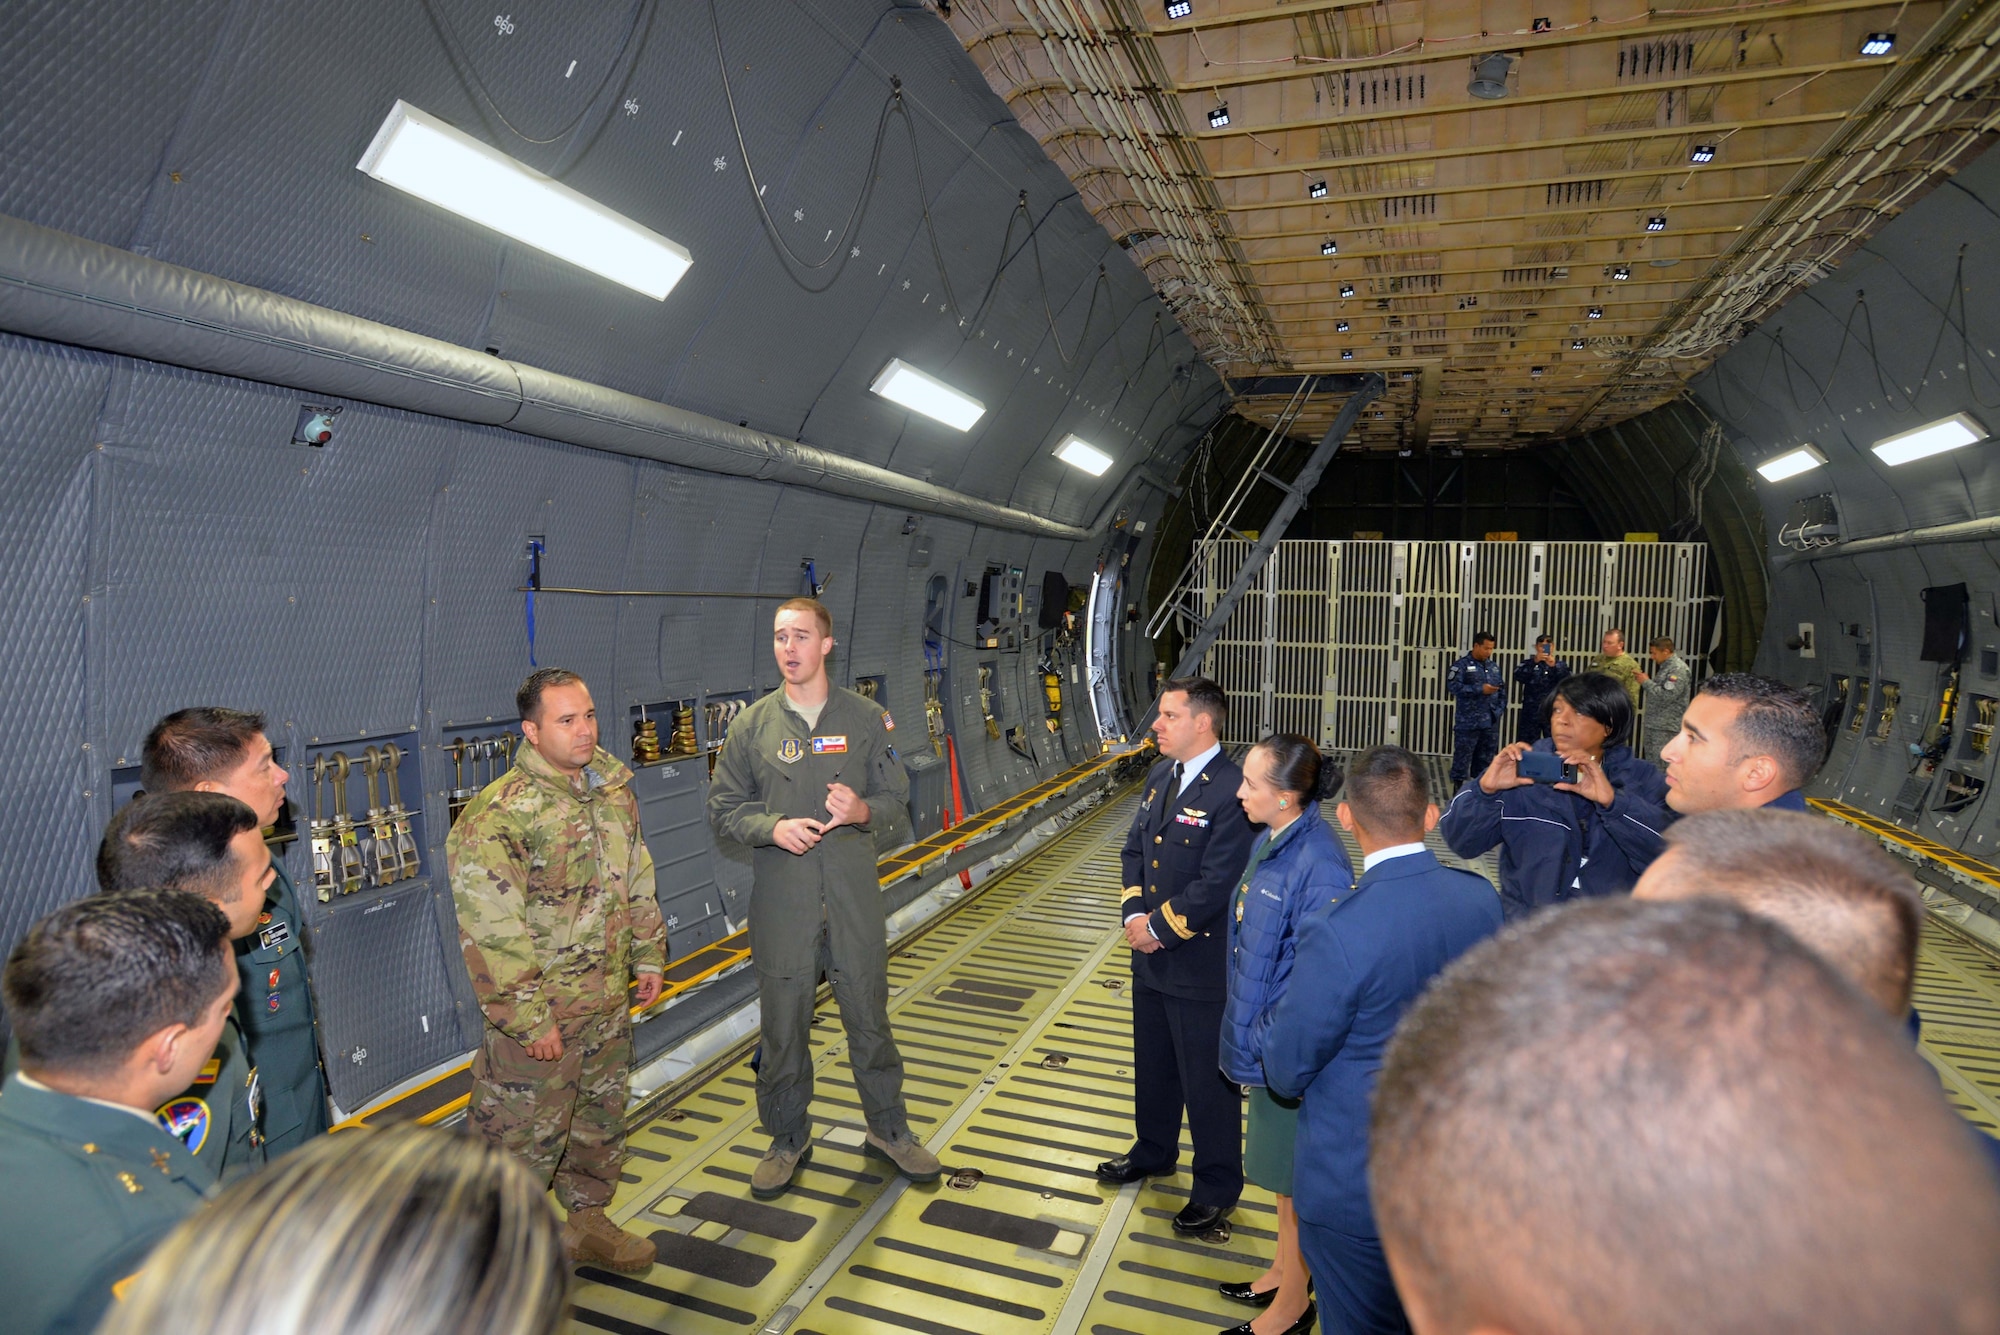 Tech. Sgt. Joshua Green, 356th Airlift Squadron loadmaster, describes the 433rd Airlift Wing’s C-5M Super Galaxy’s cargo carrying capabilities to Inter-American Air Forces Academy students Oct. 30, 2019 at Joint Base San Antonio-Lackland.